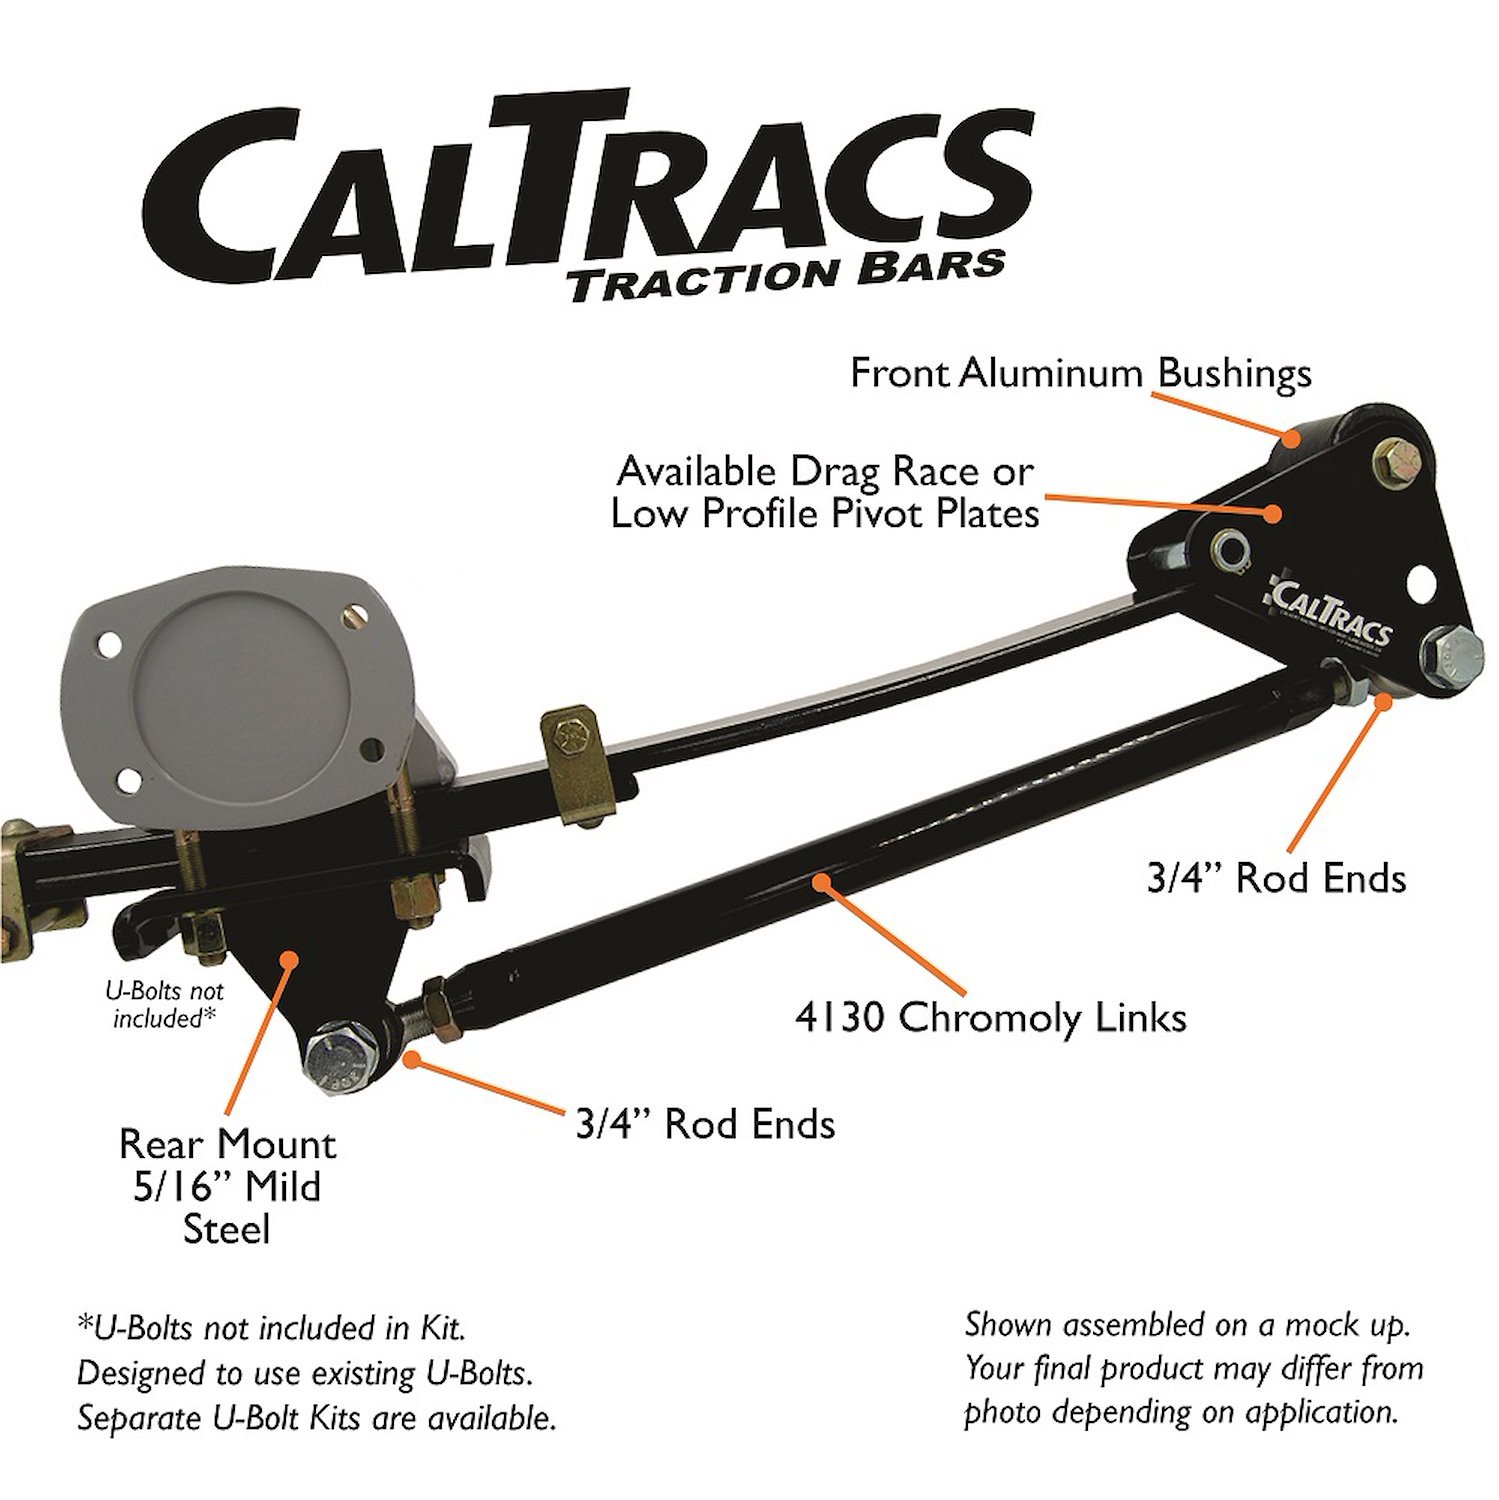 2103-1 Traction Bars, Caltracs Standard Low Pro